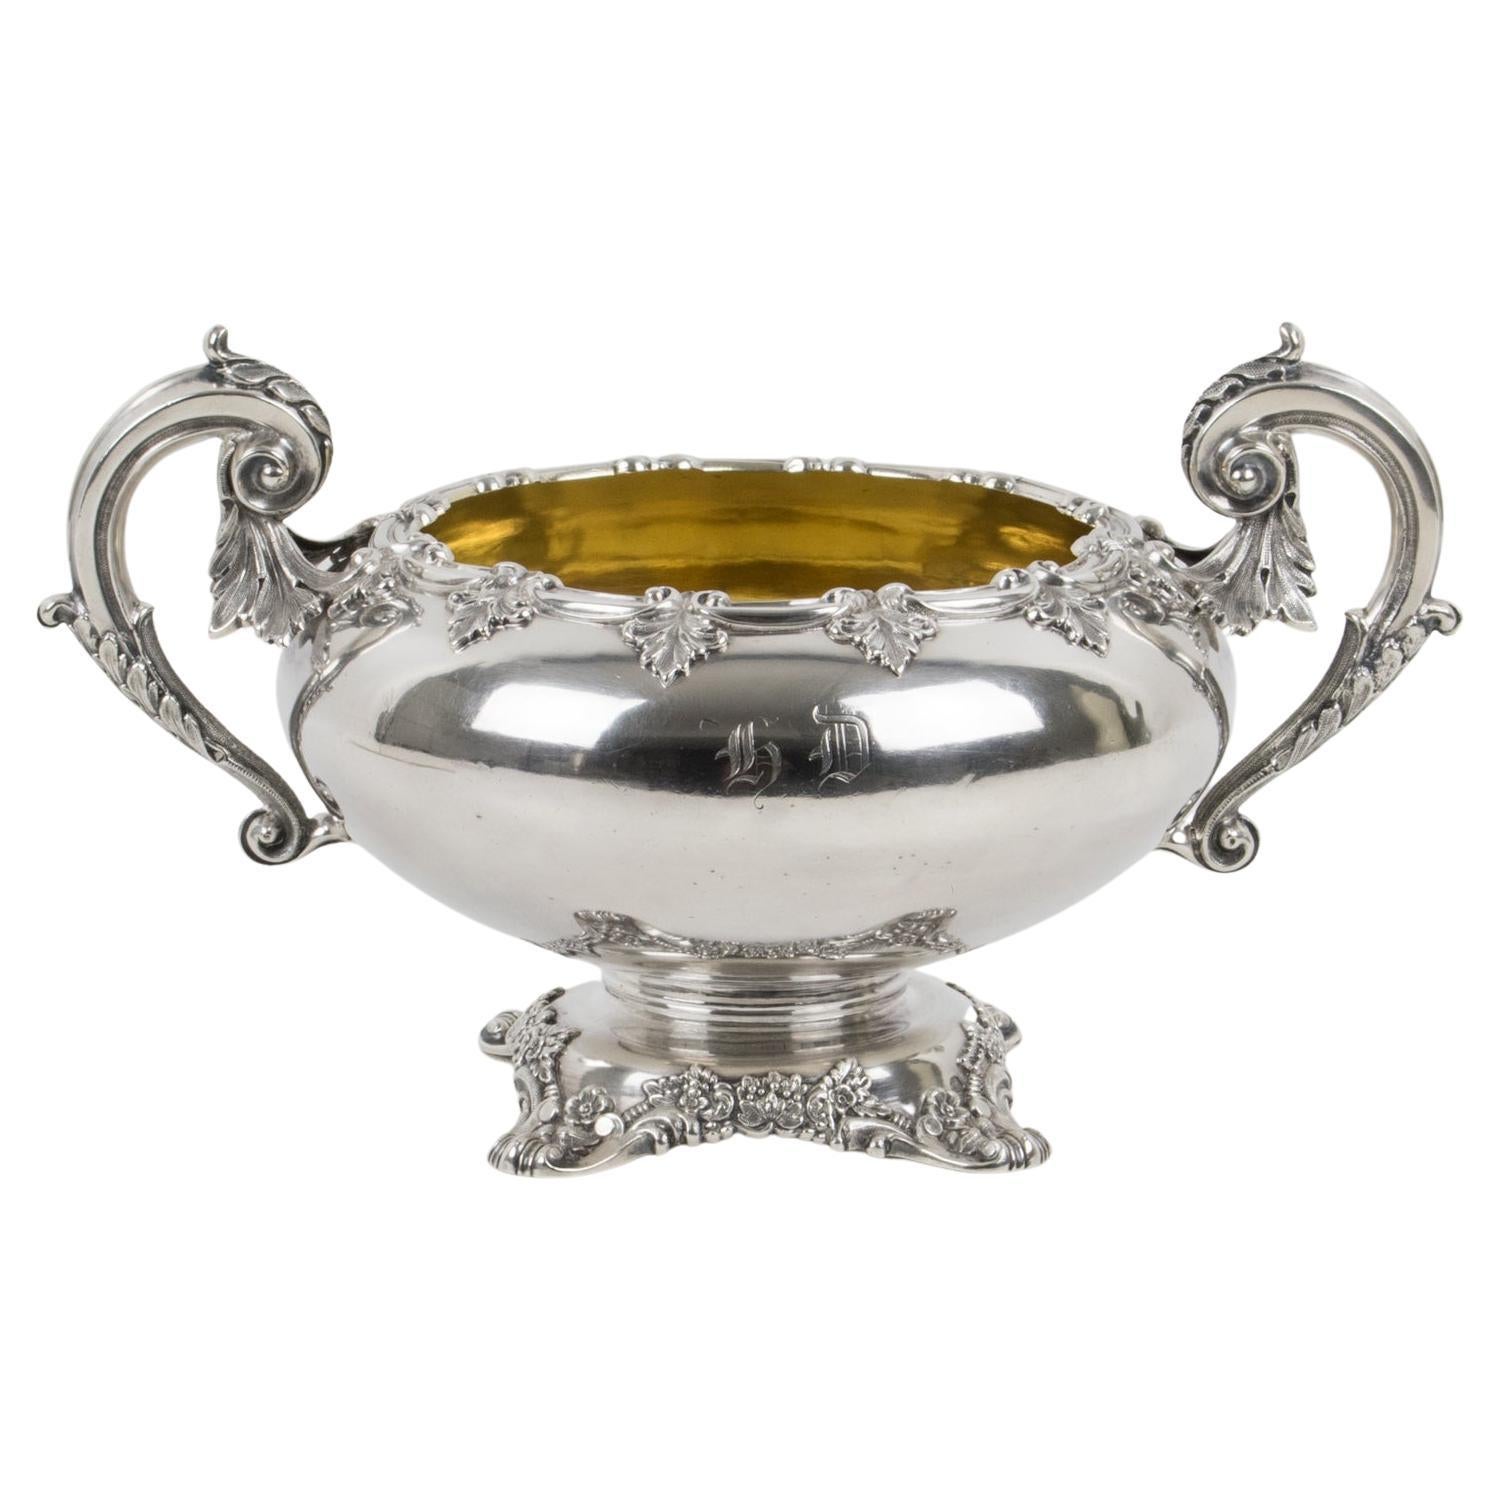 Gustave Odiot Paris Sterling Silver Decorative Bowl, 19th Century